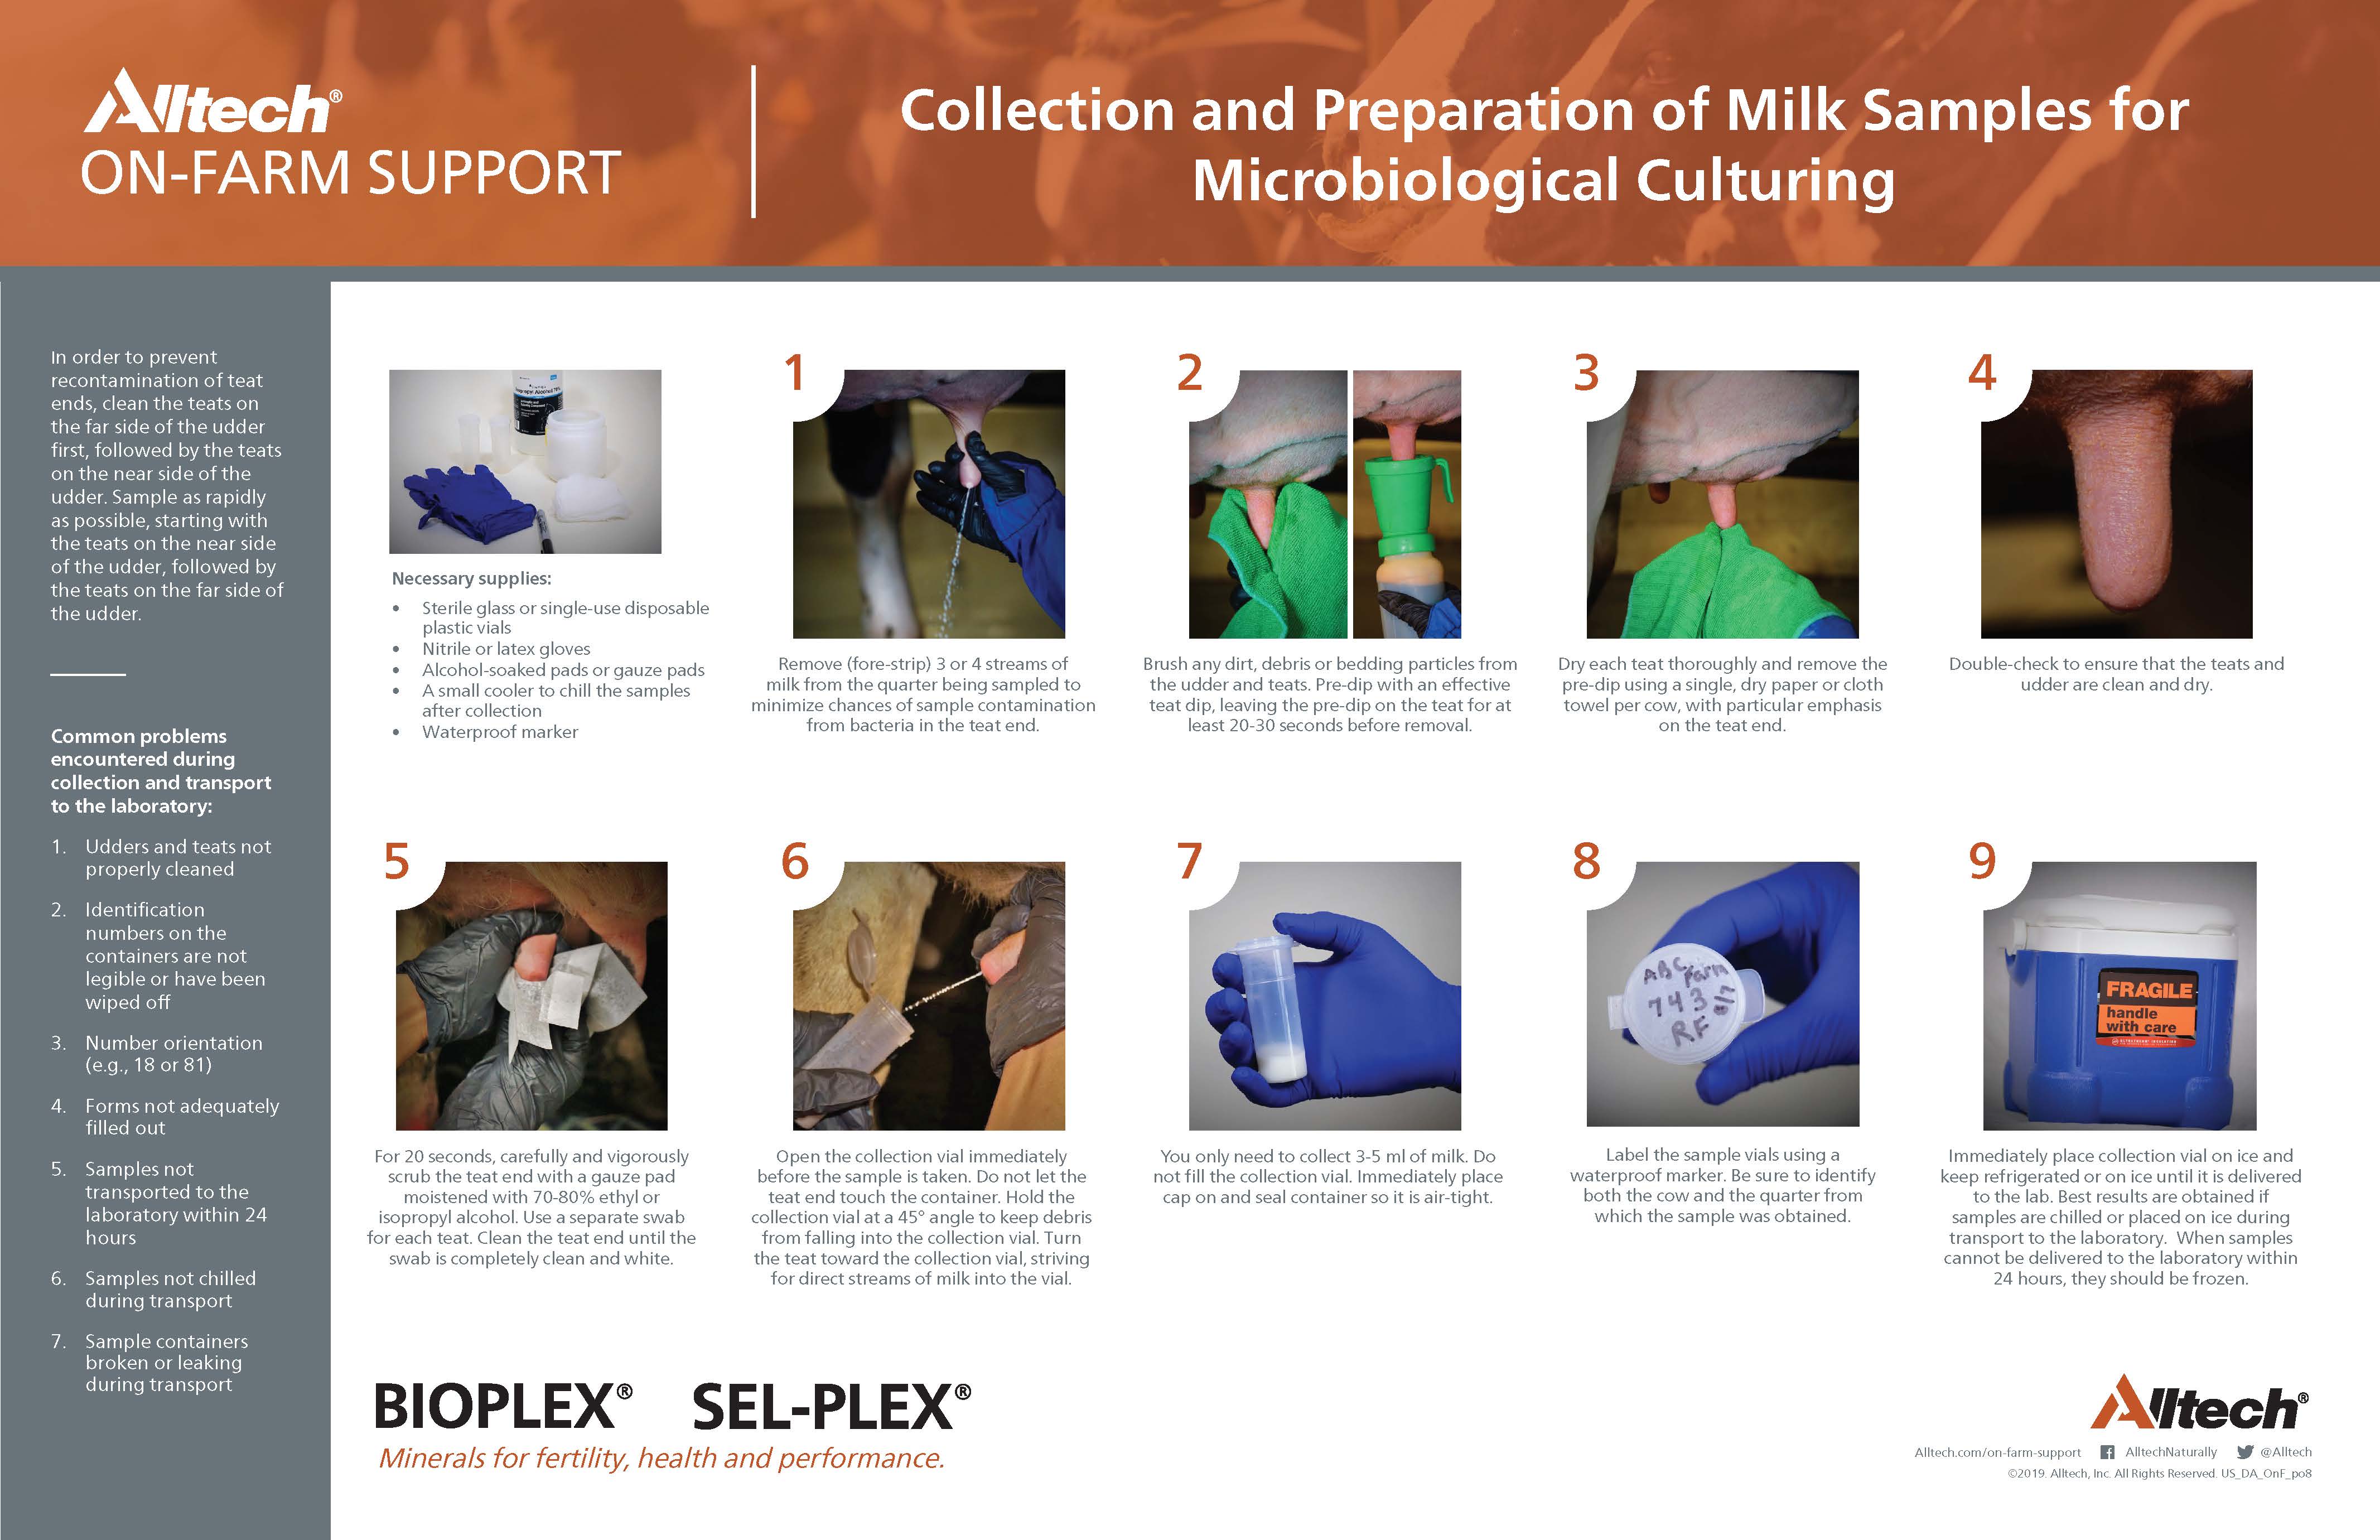 Collection and Preparation of Milk Samples for Microbiological